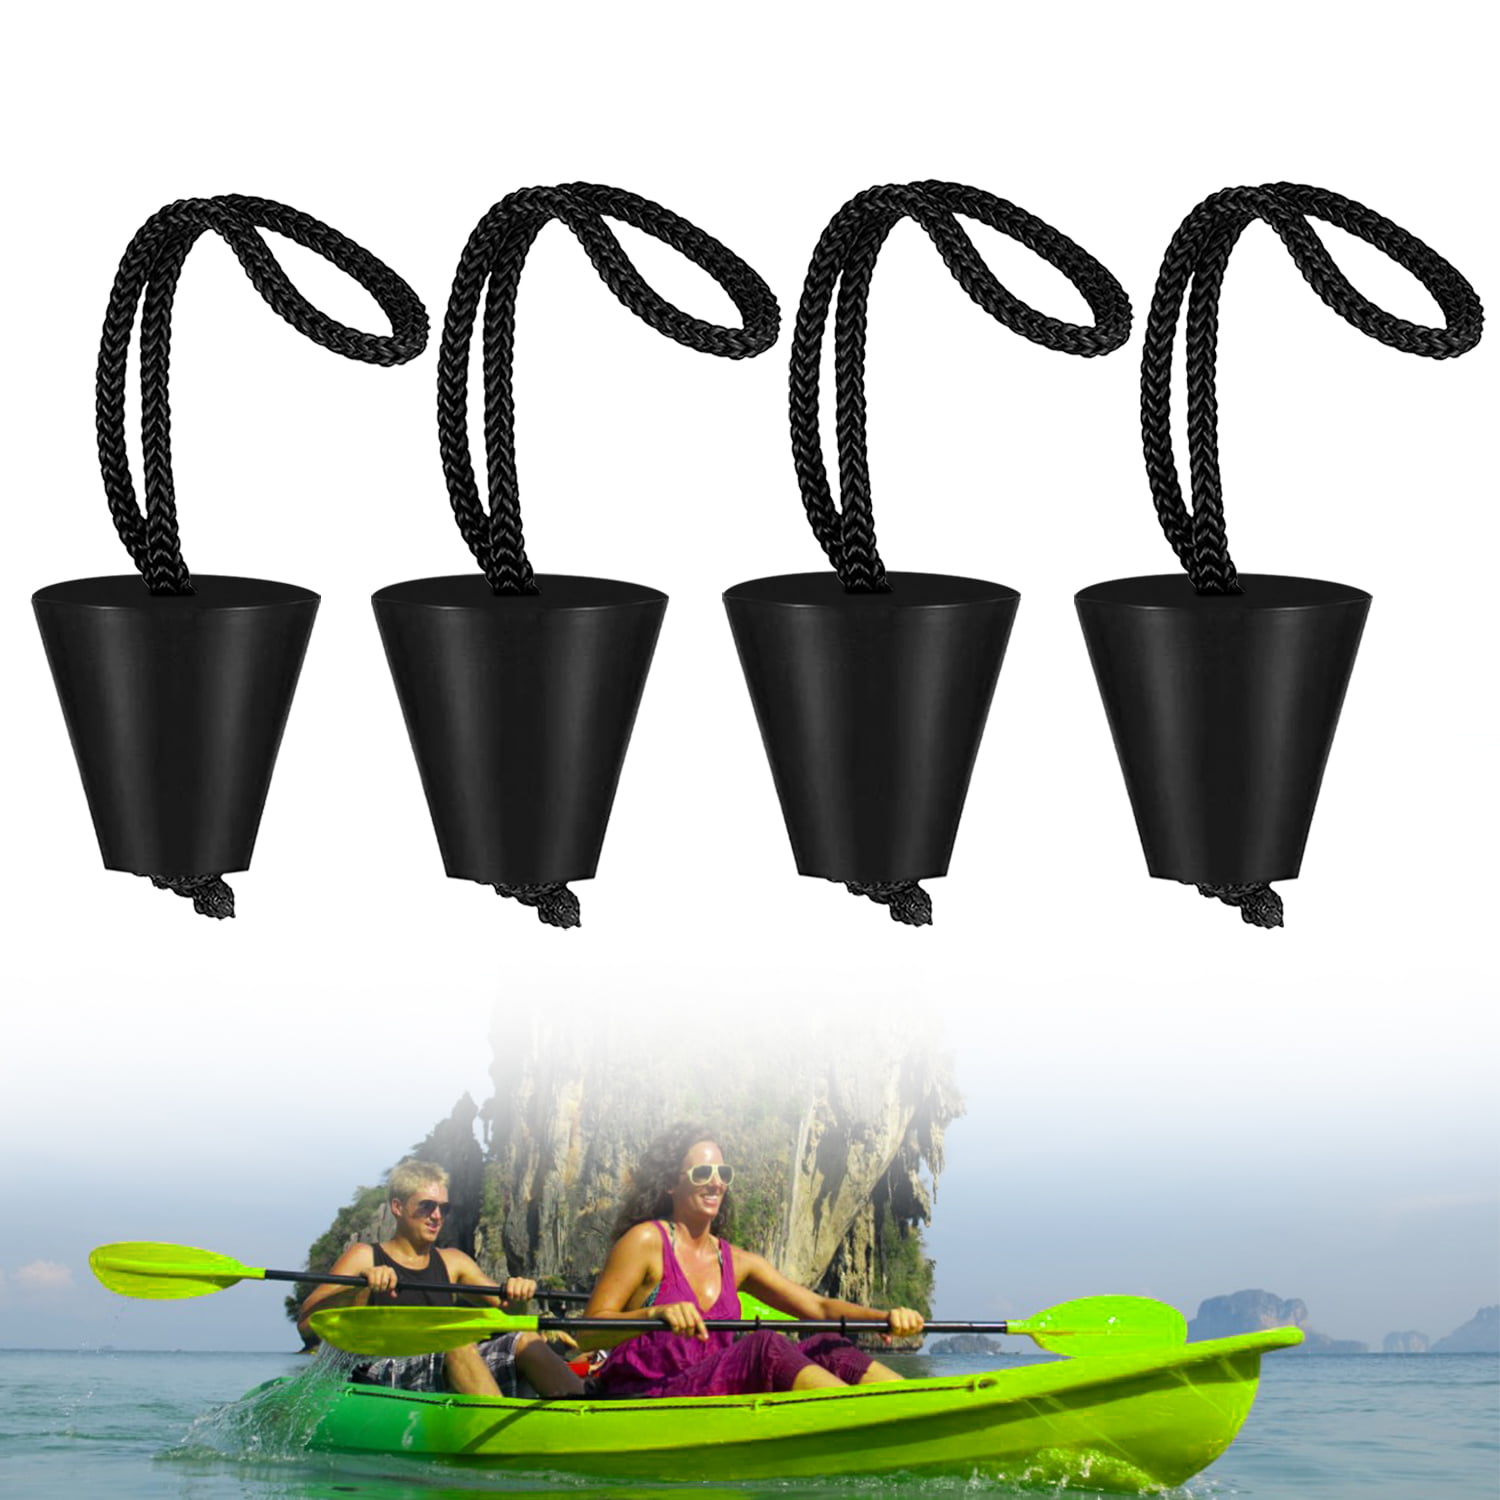 Yundxi Pack of 8 Kayak Scupper Plug Kit Canoe Drain Holes Stopper Bung Compressible Rubber Stops with Pull String fit Fits kayak scupper holes among 3/4 of to 1.5 inches 